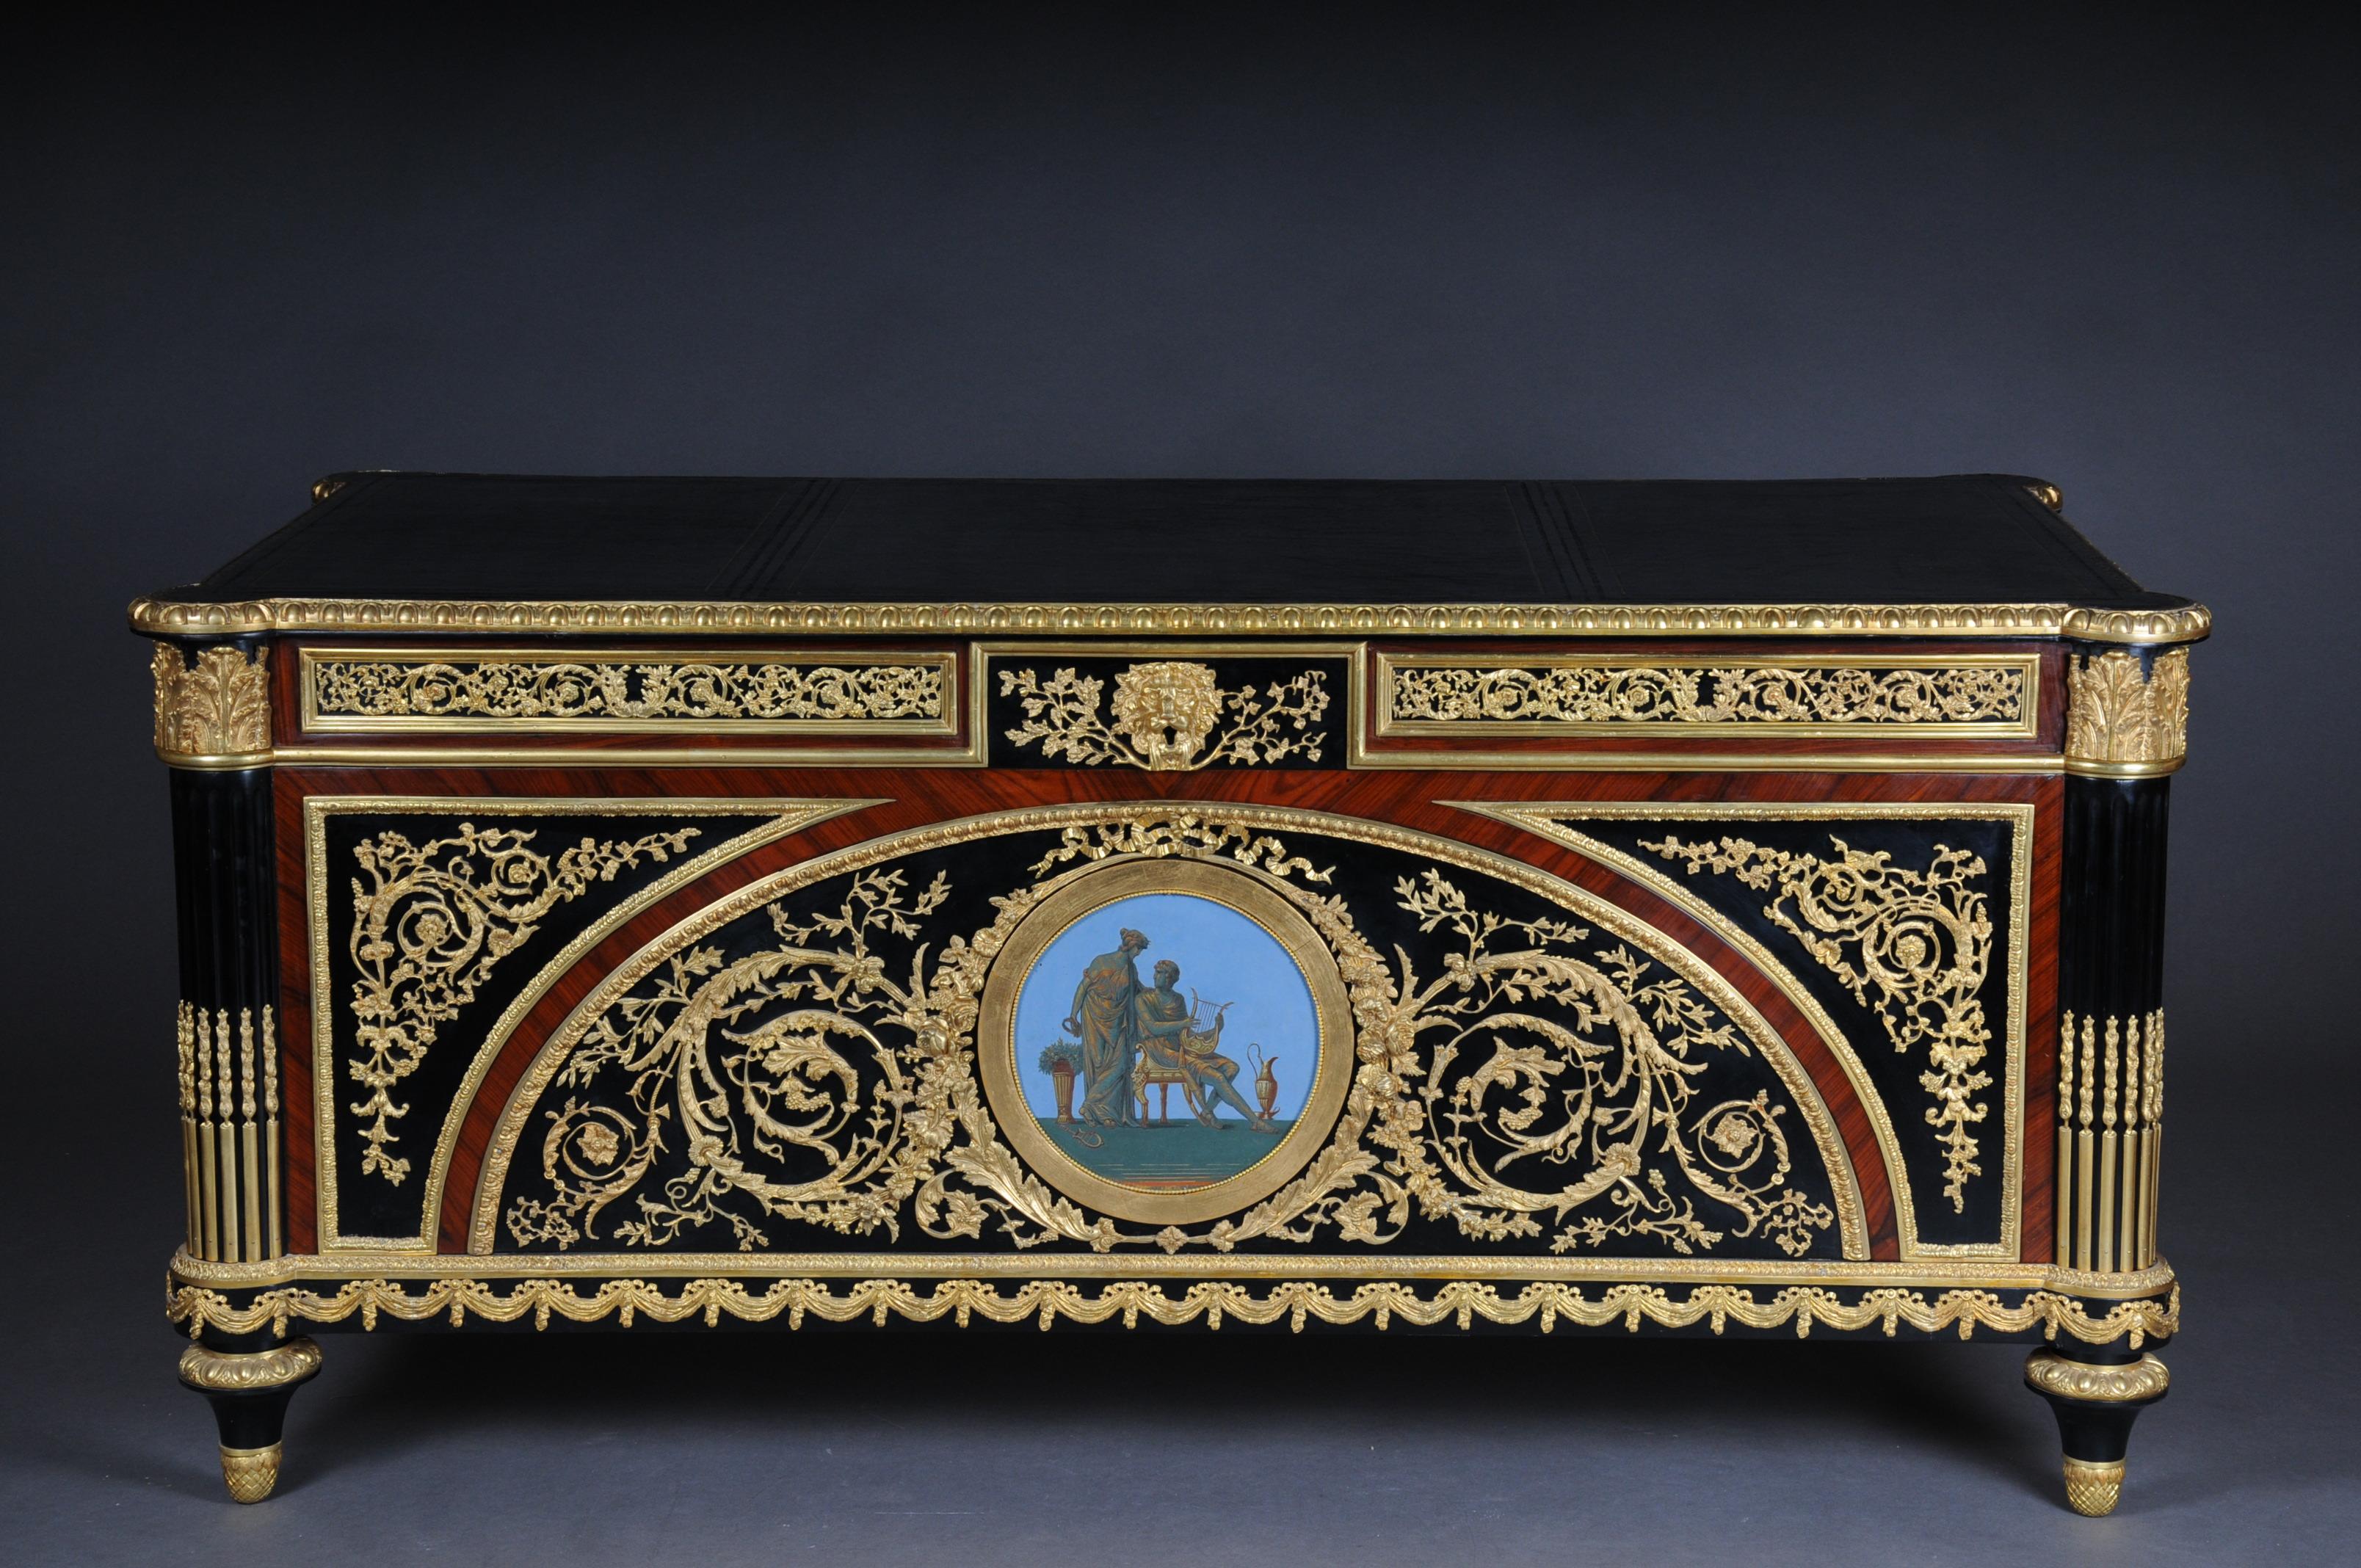 Imperial bureau plat / desk in the style of Louis XVI

Piano black polished veneer on solid oak and wood. Extremely finely chased and rich bronze applications. Rectangular body. A hand painted picture badge on the front and side view. Gilded